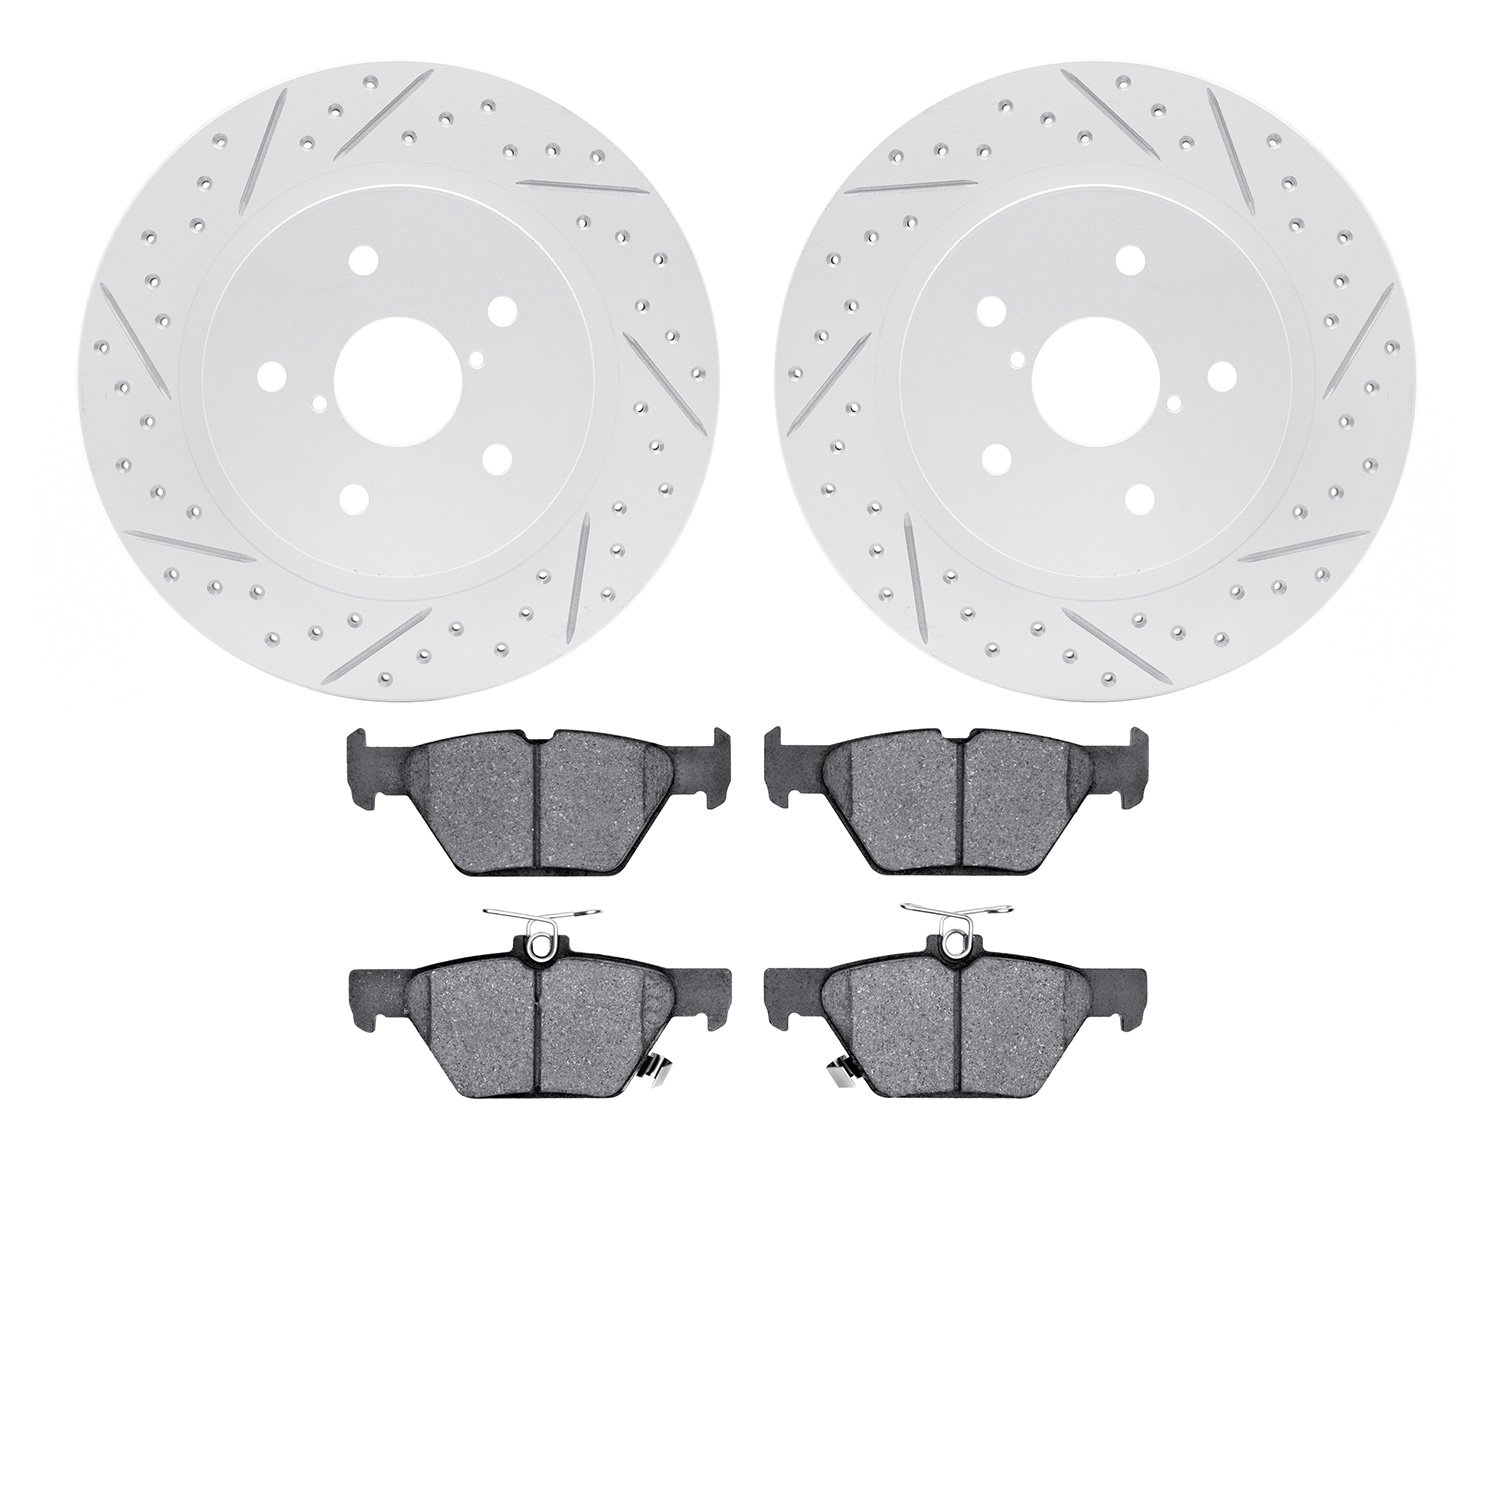 2502-13027 Geoperformance Drilled/Slotted Rotors w/5000 Advanced Brake Pads Kit, Fits Select Subaru, Position: Rear